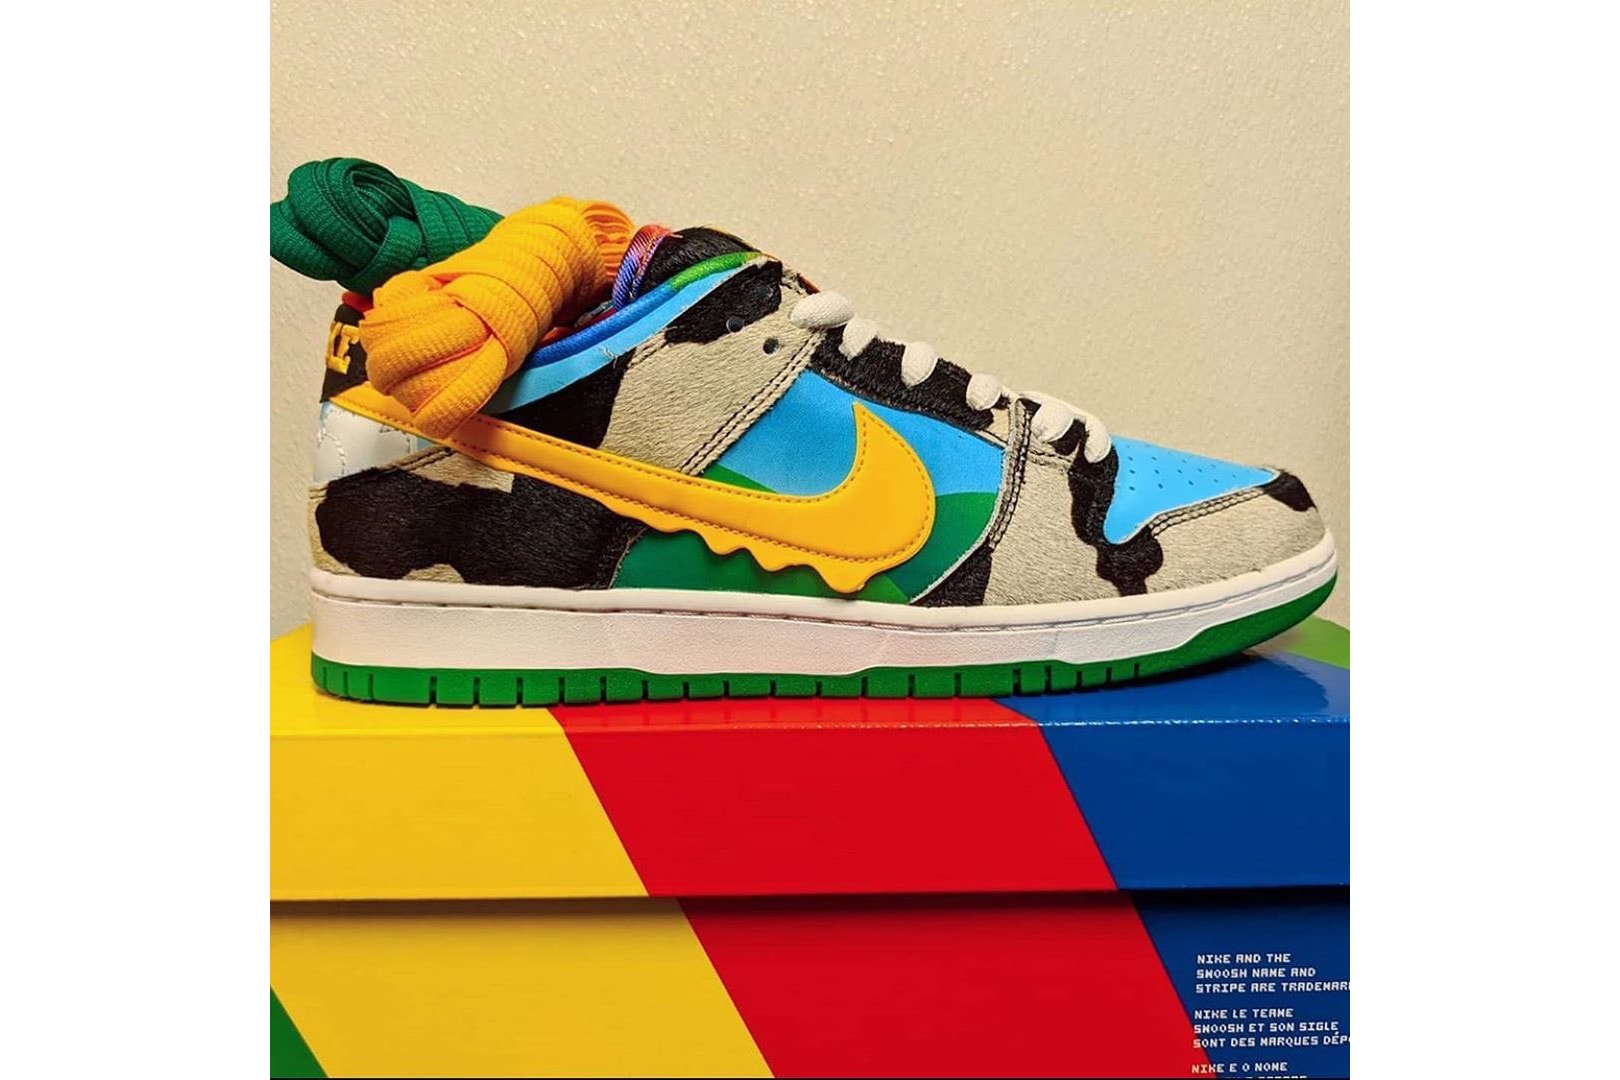 Ben & Jerry's x Nike SB Dunk Low Teaser  ice cream American milk cows  skateboarding pony hair collaborations shoes chunk monkey 